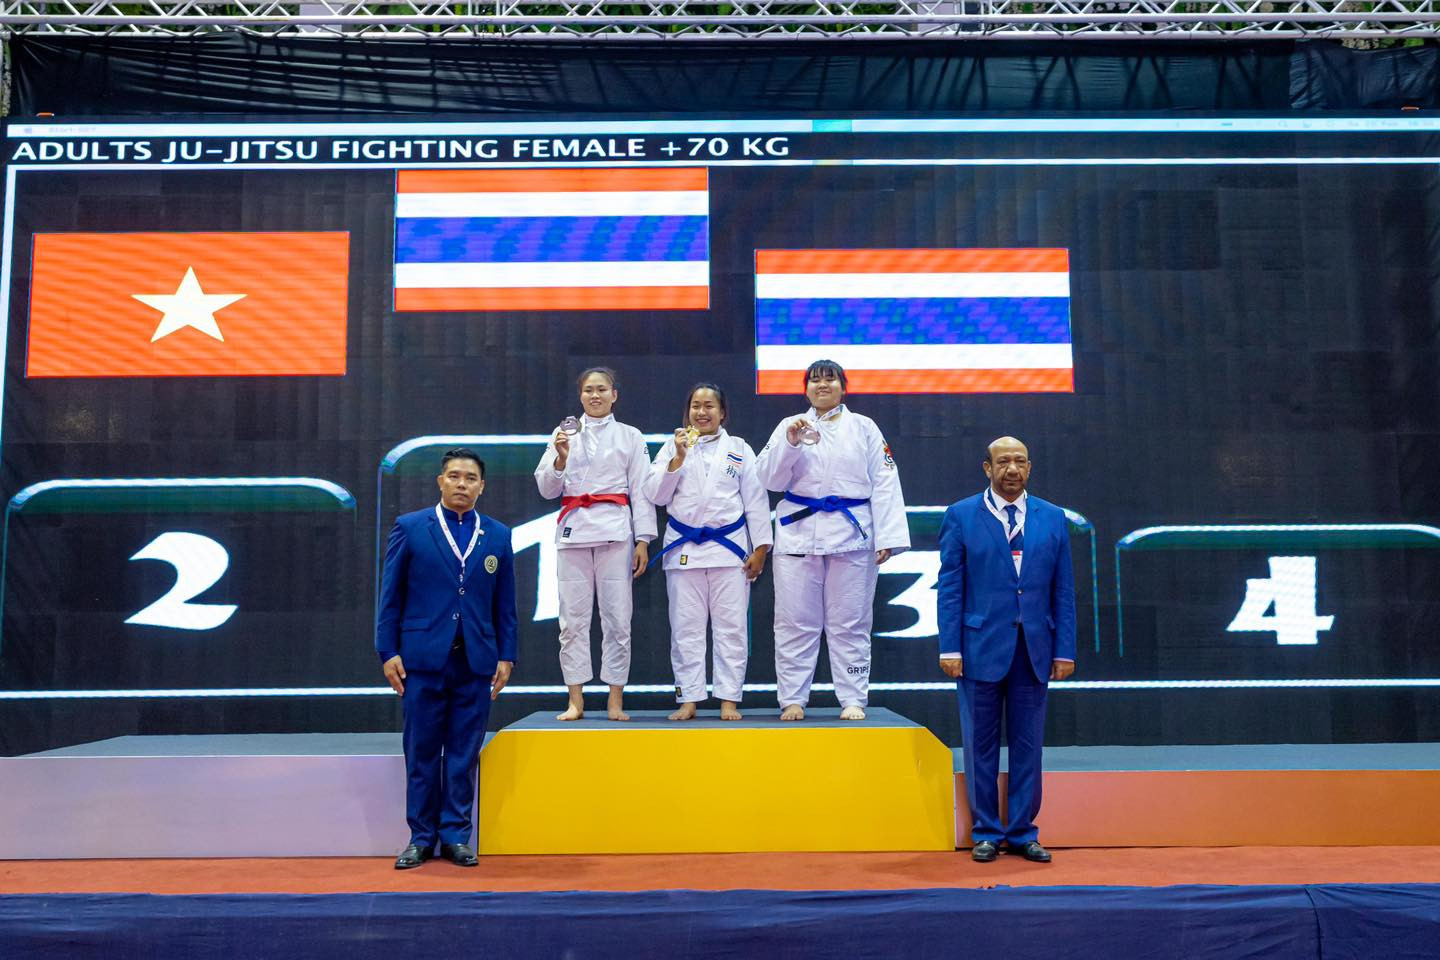 Thailand sit atop the medals table after day one with 11 golds, five silvers, and 10 bronzes ©JJAU